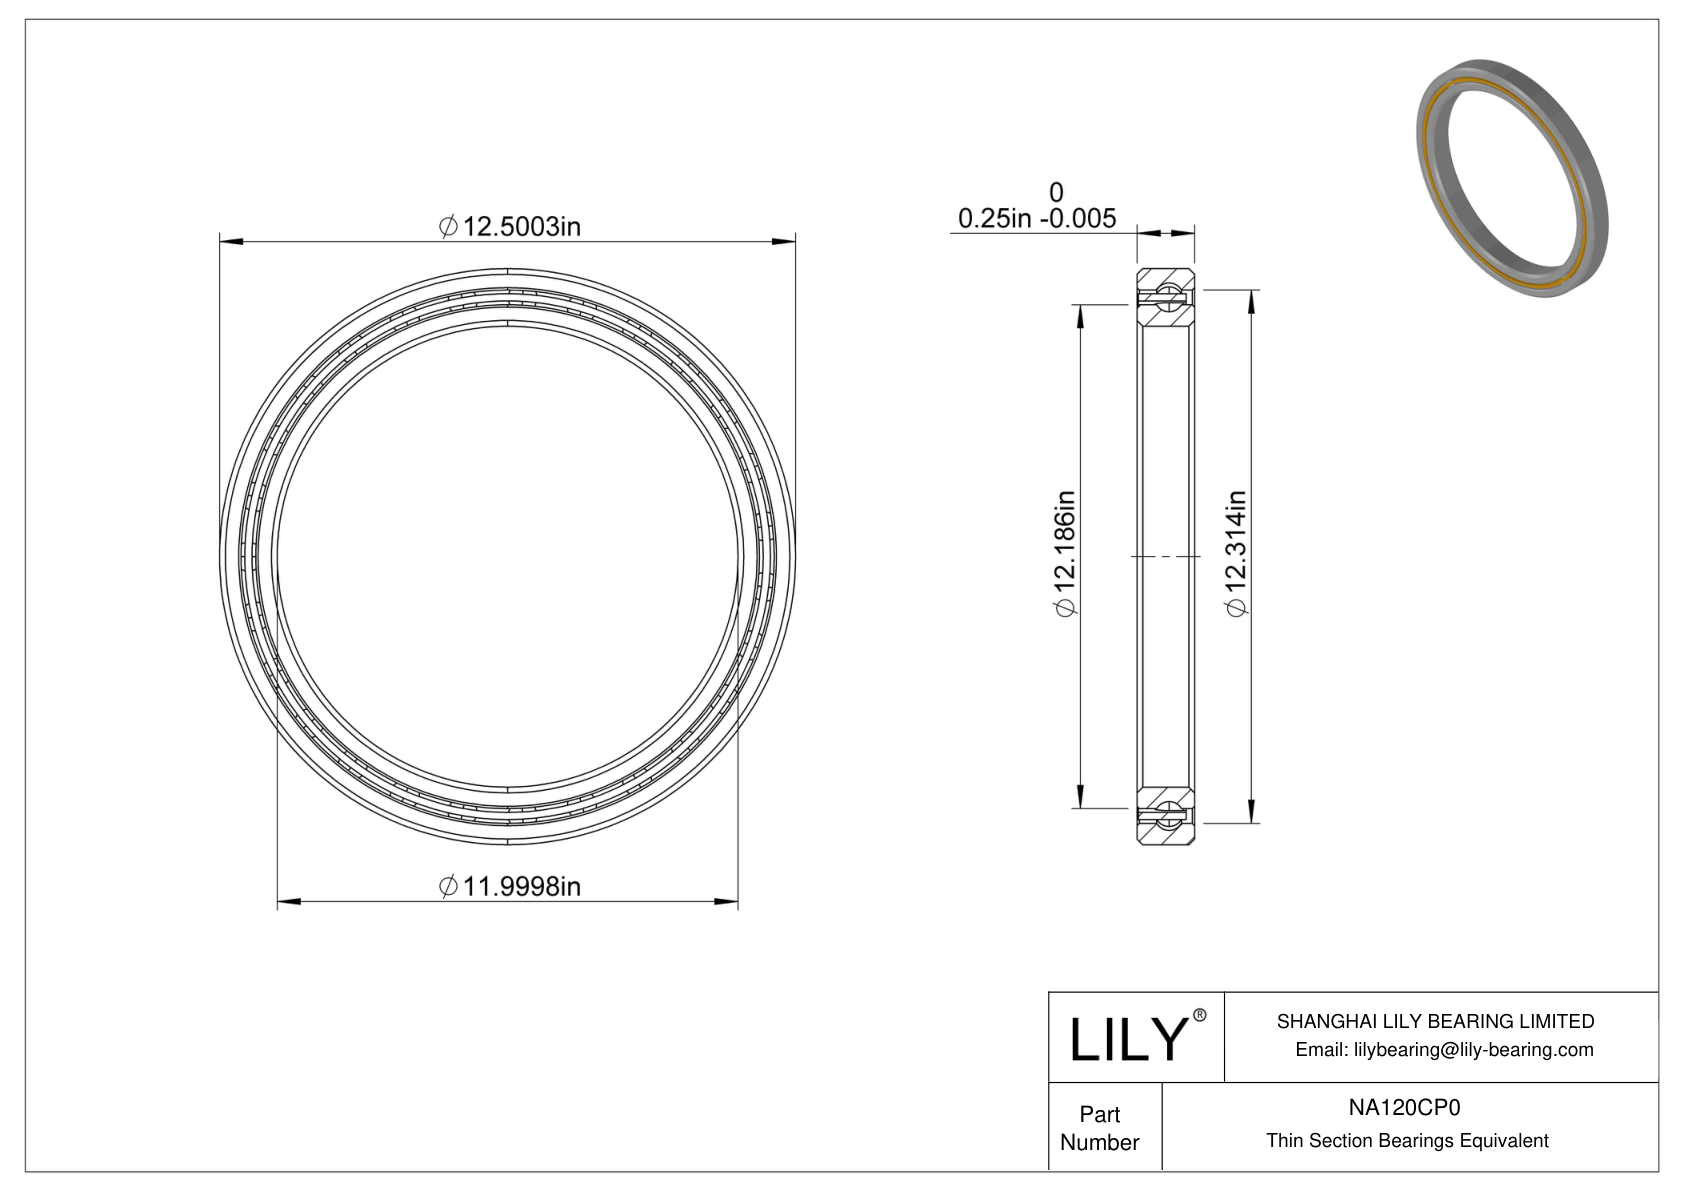 NA120CP0 Constant Section (CS) Bearings cad drawing